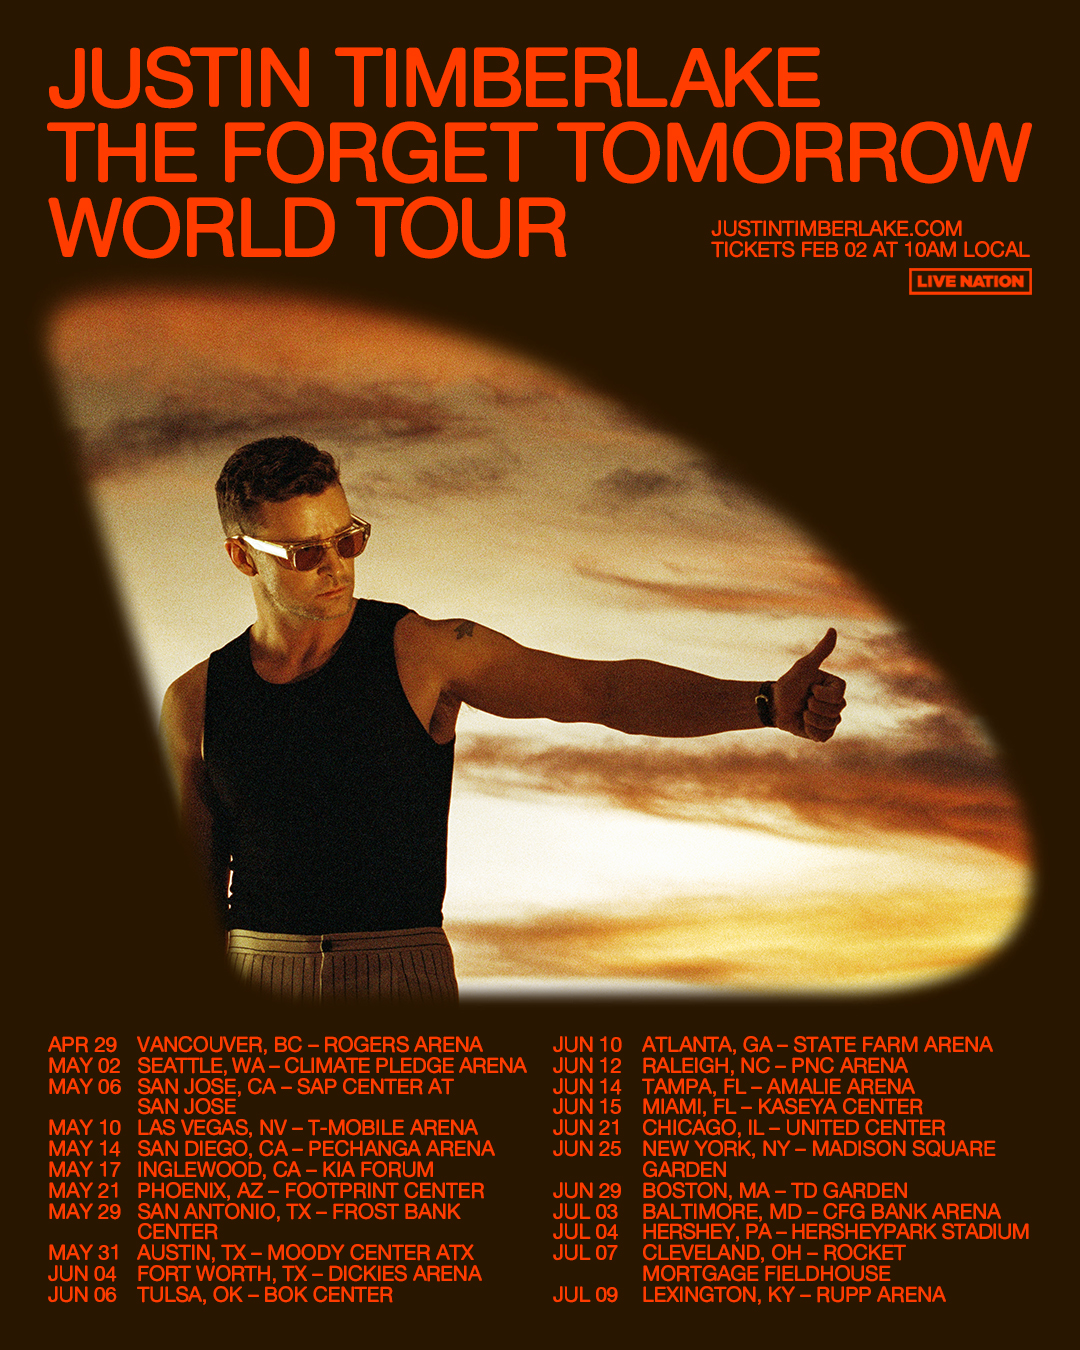 Justin Timberlake - The Forget Tomorrow World Tour at Madison Square Garden Tickets